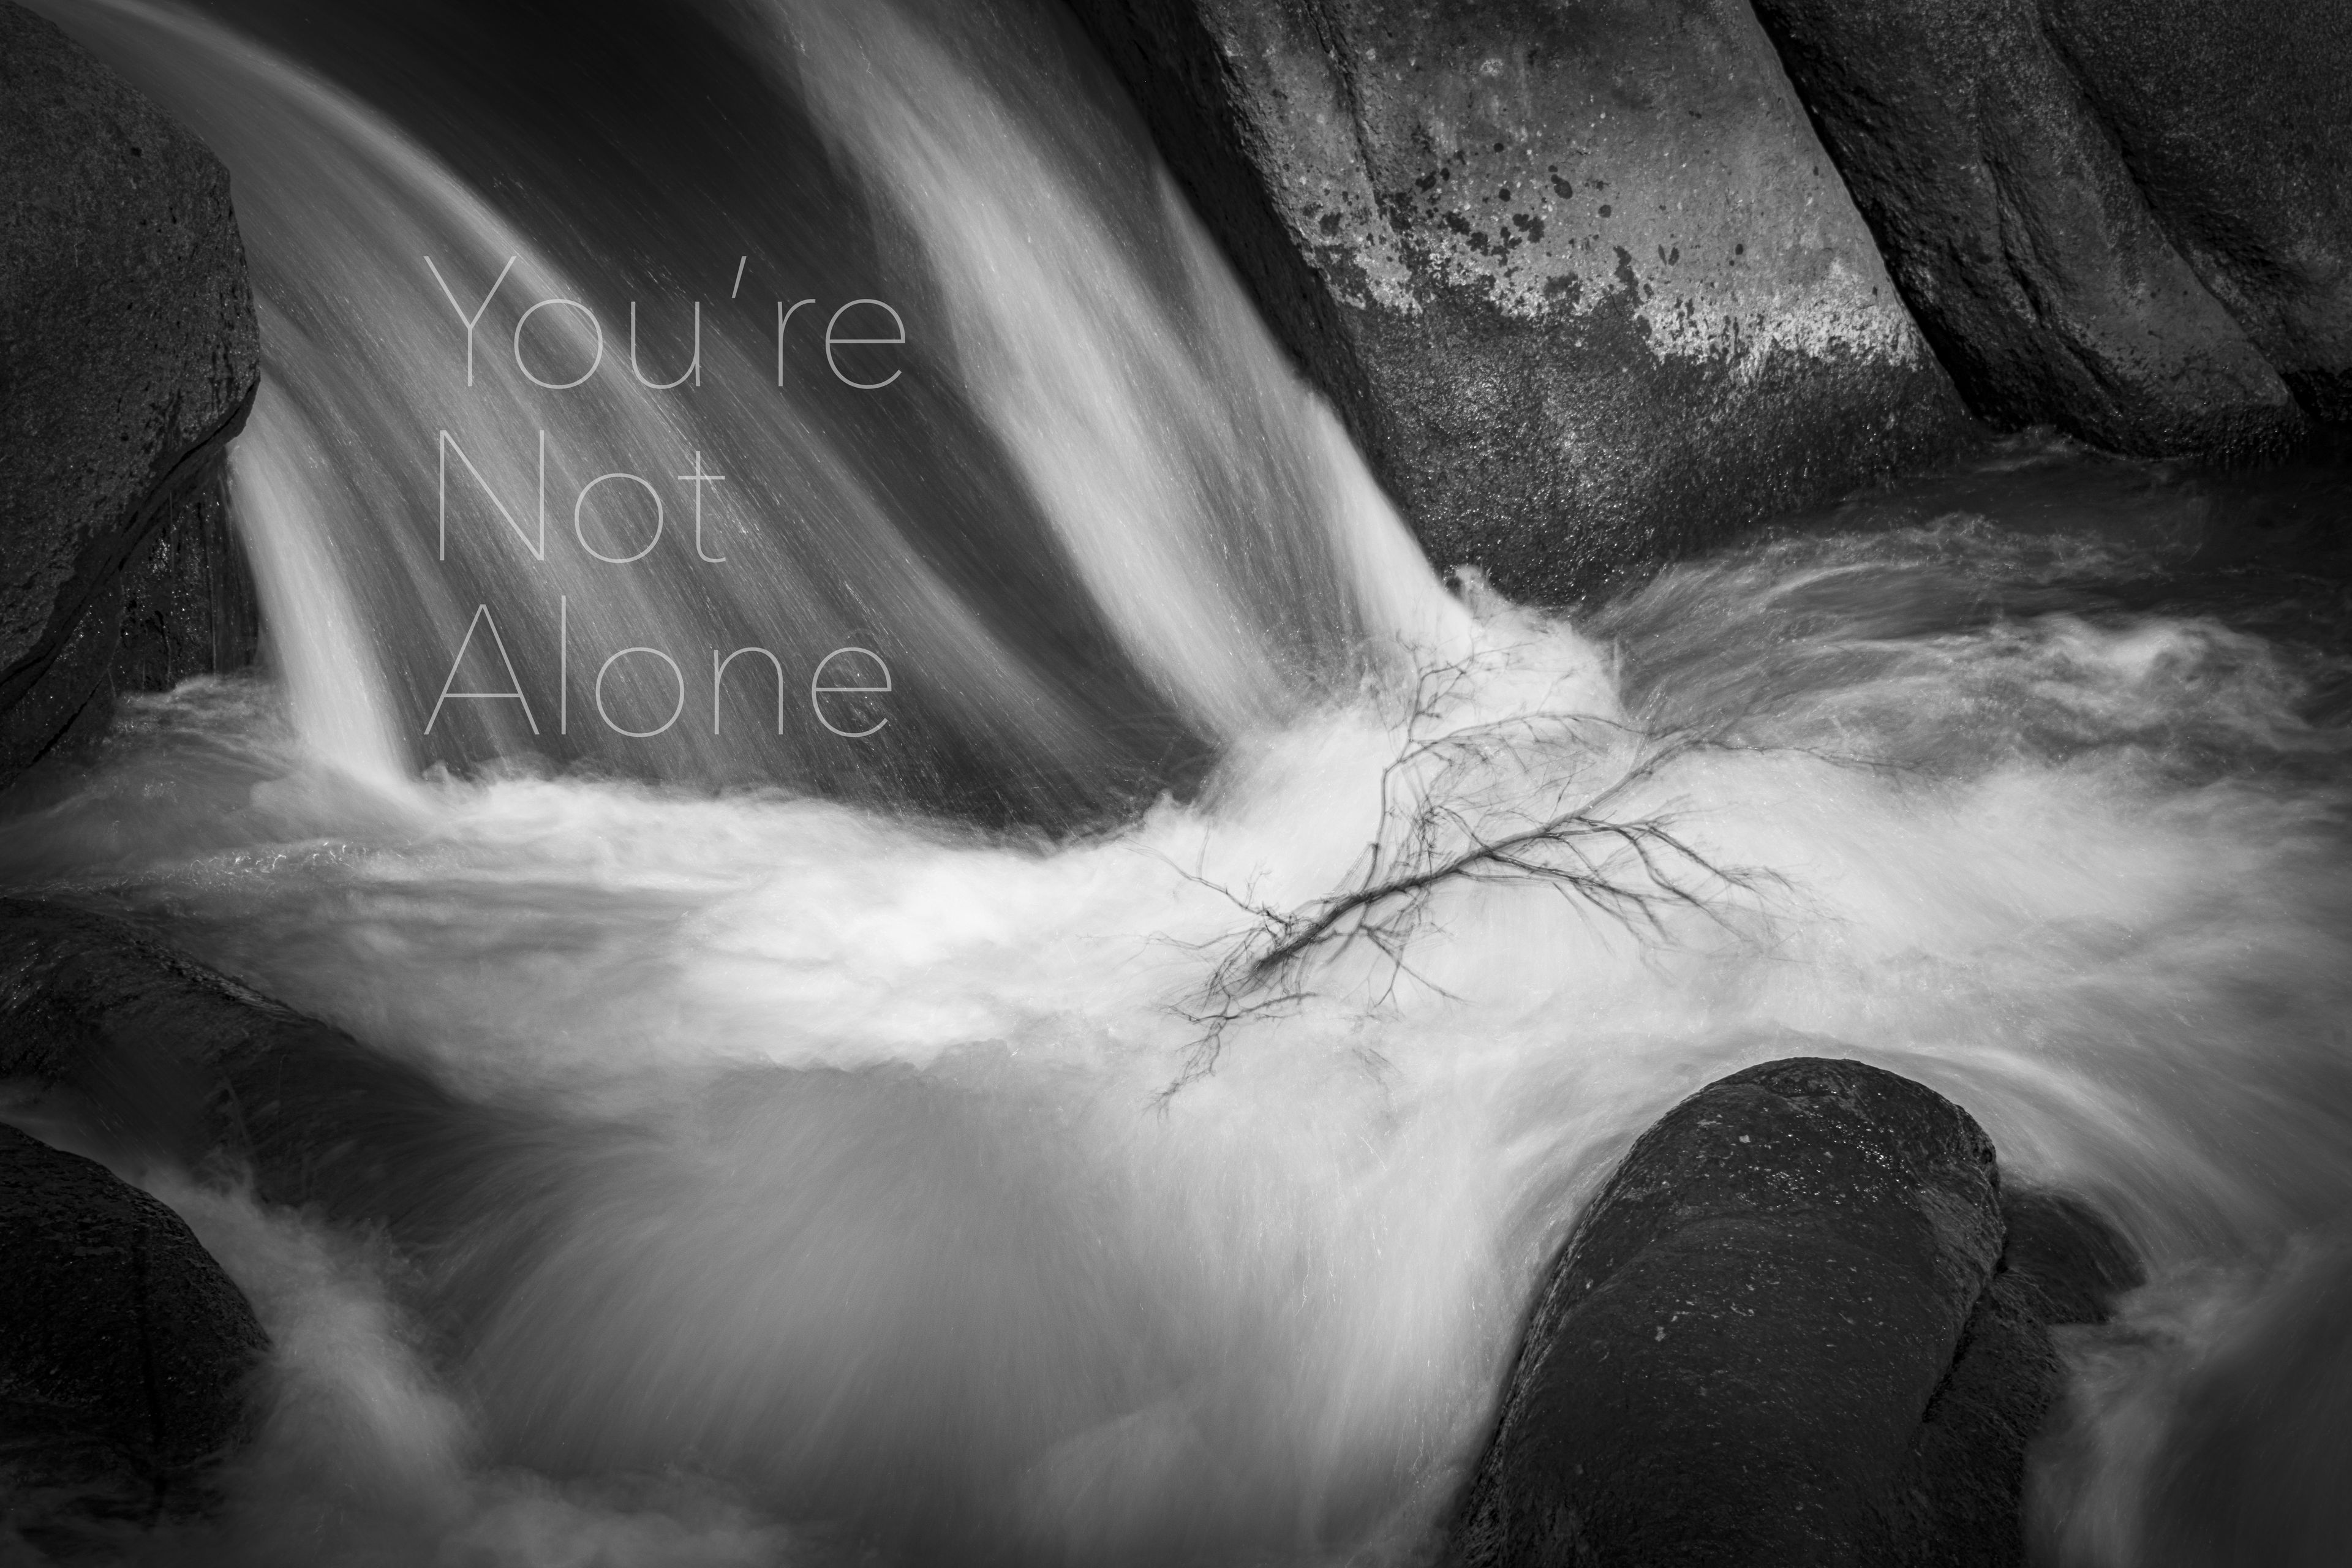 You’re Not Alone - The Rapture by Donna Martinez